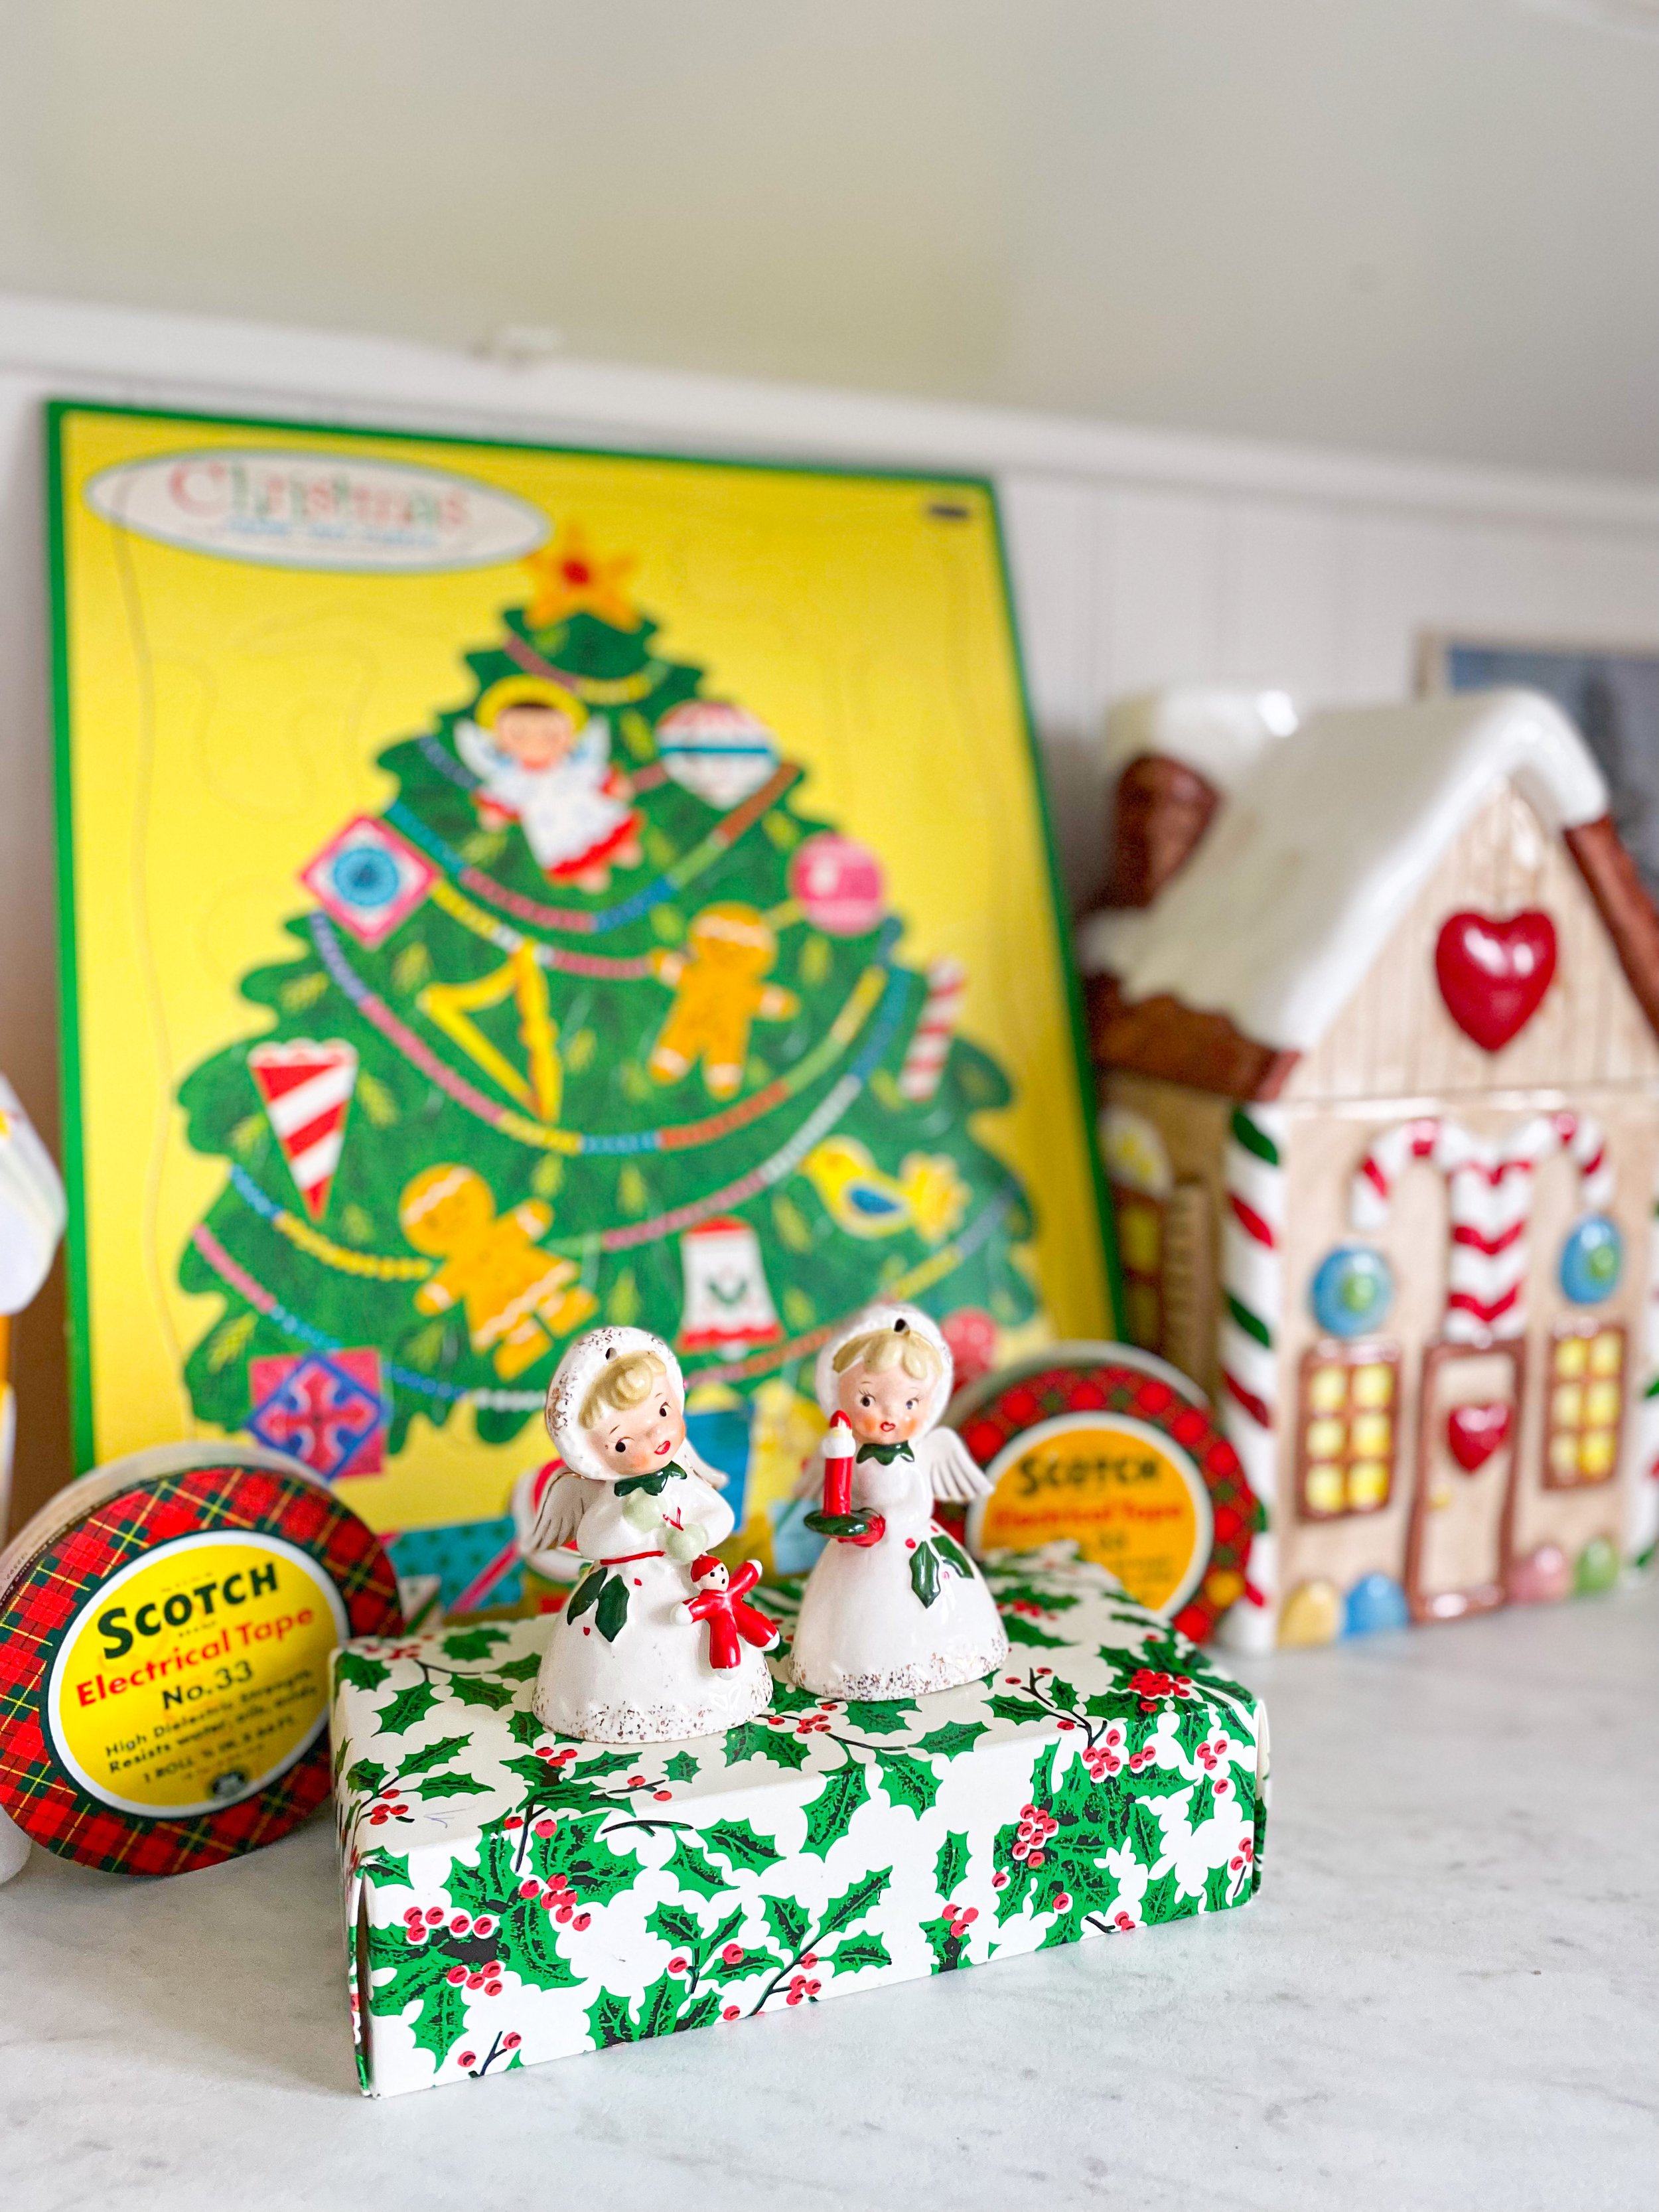 Vintage 1950s Christmas collectibles